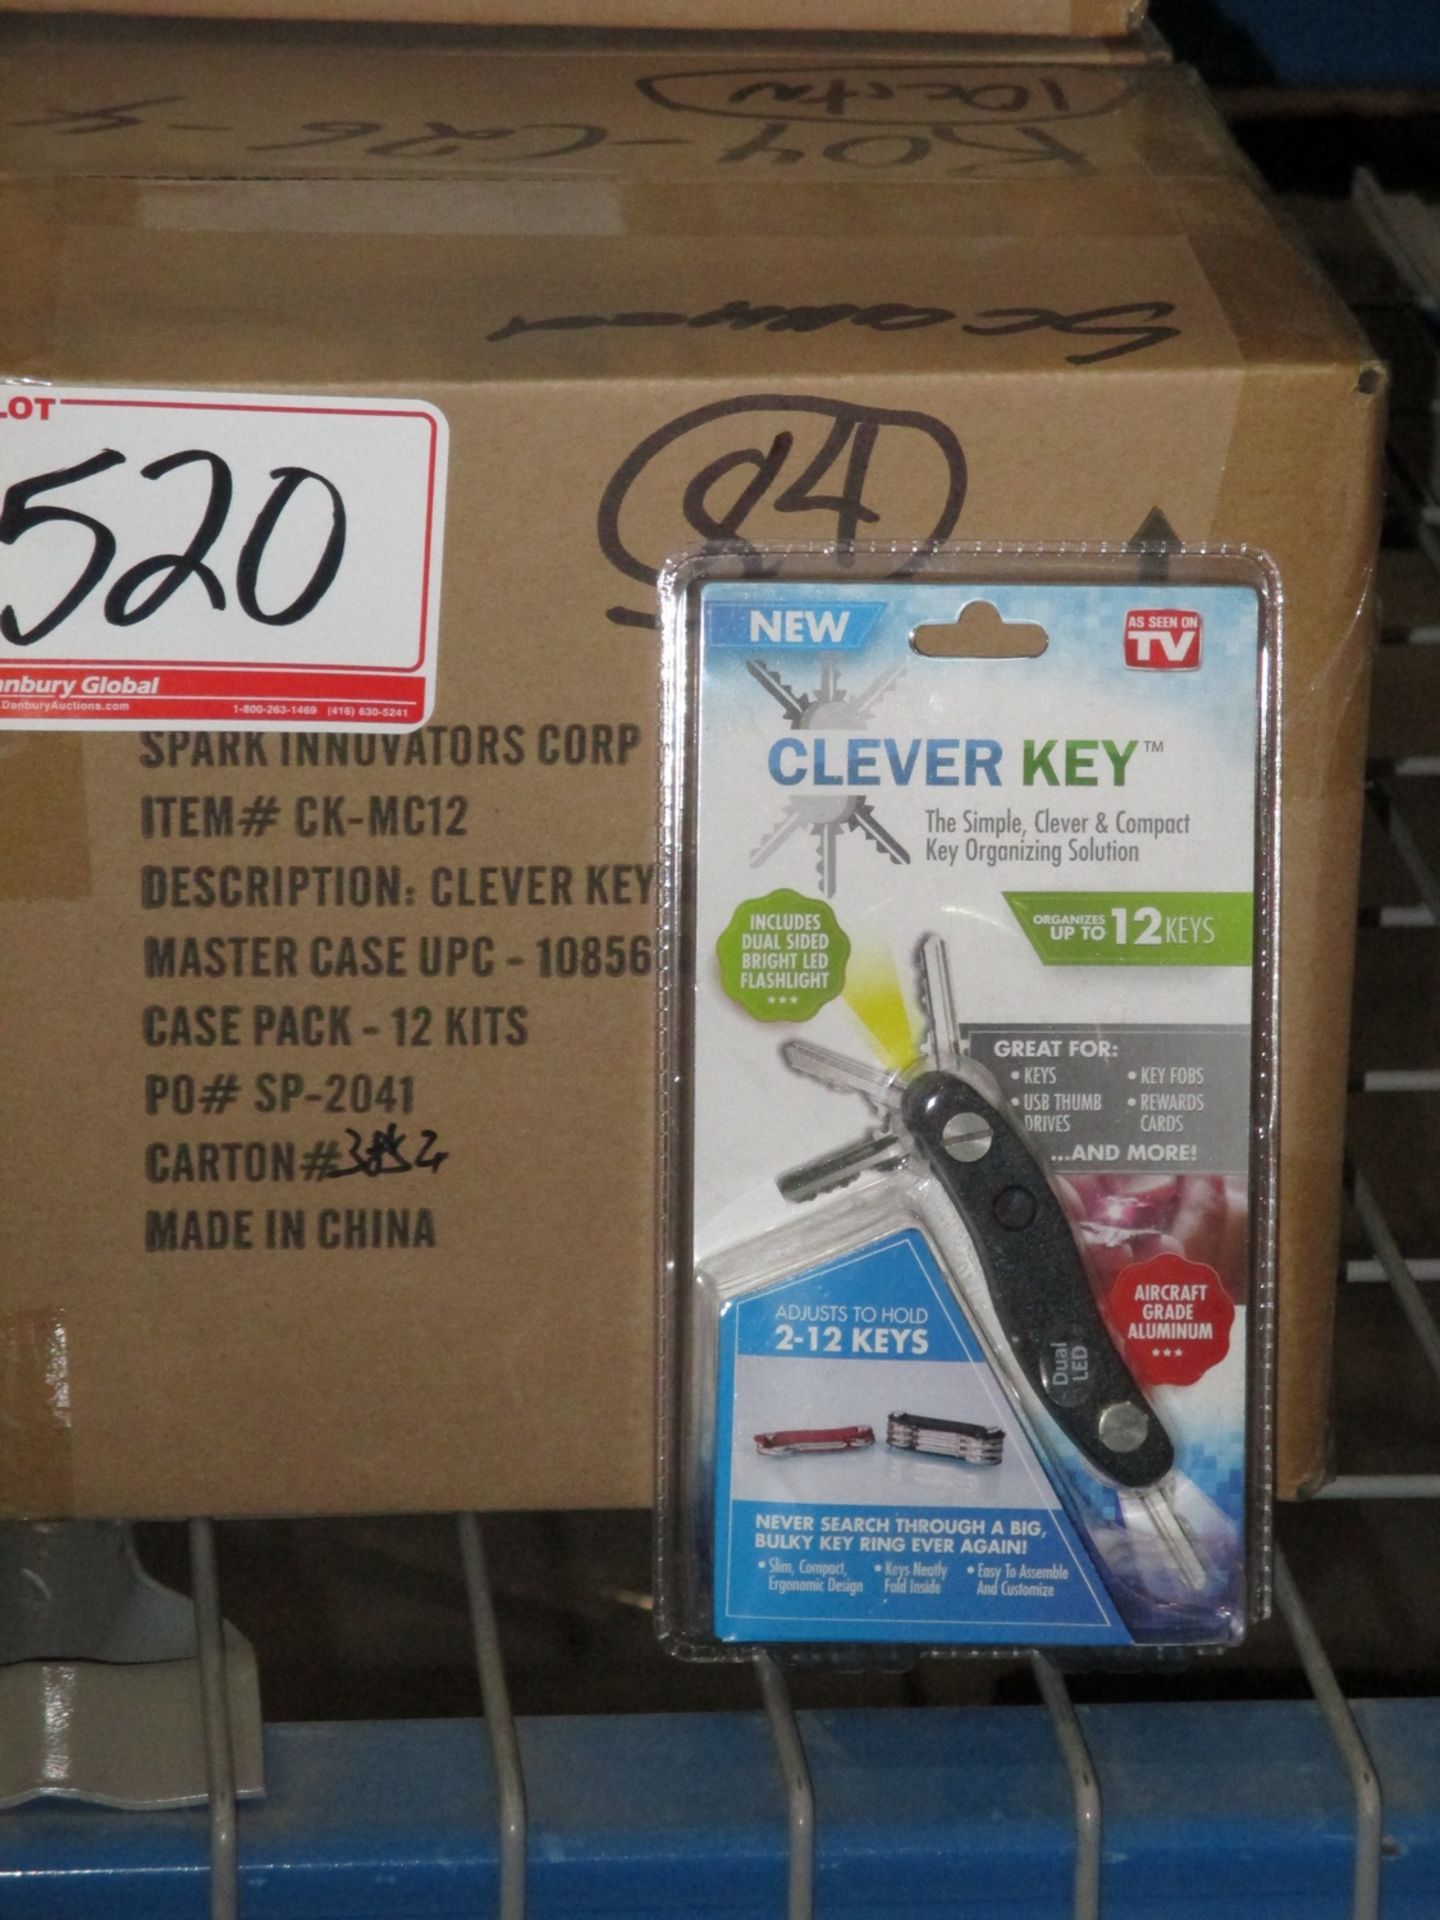 PCS - CLEVER KEY - HOLDS UP TO 12 KEYS